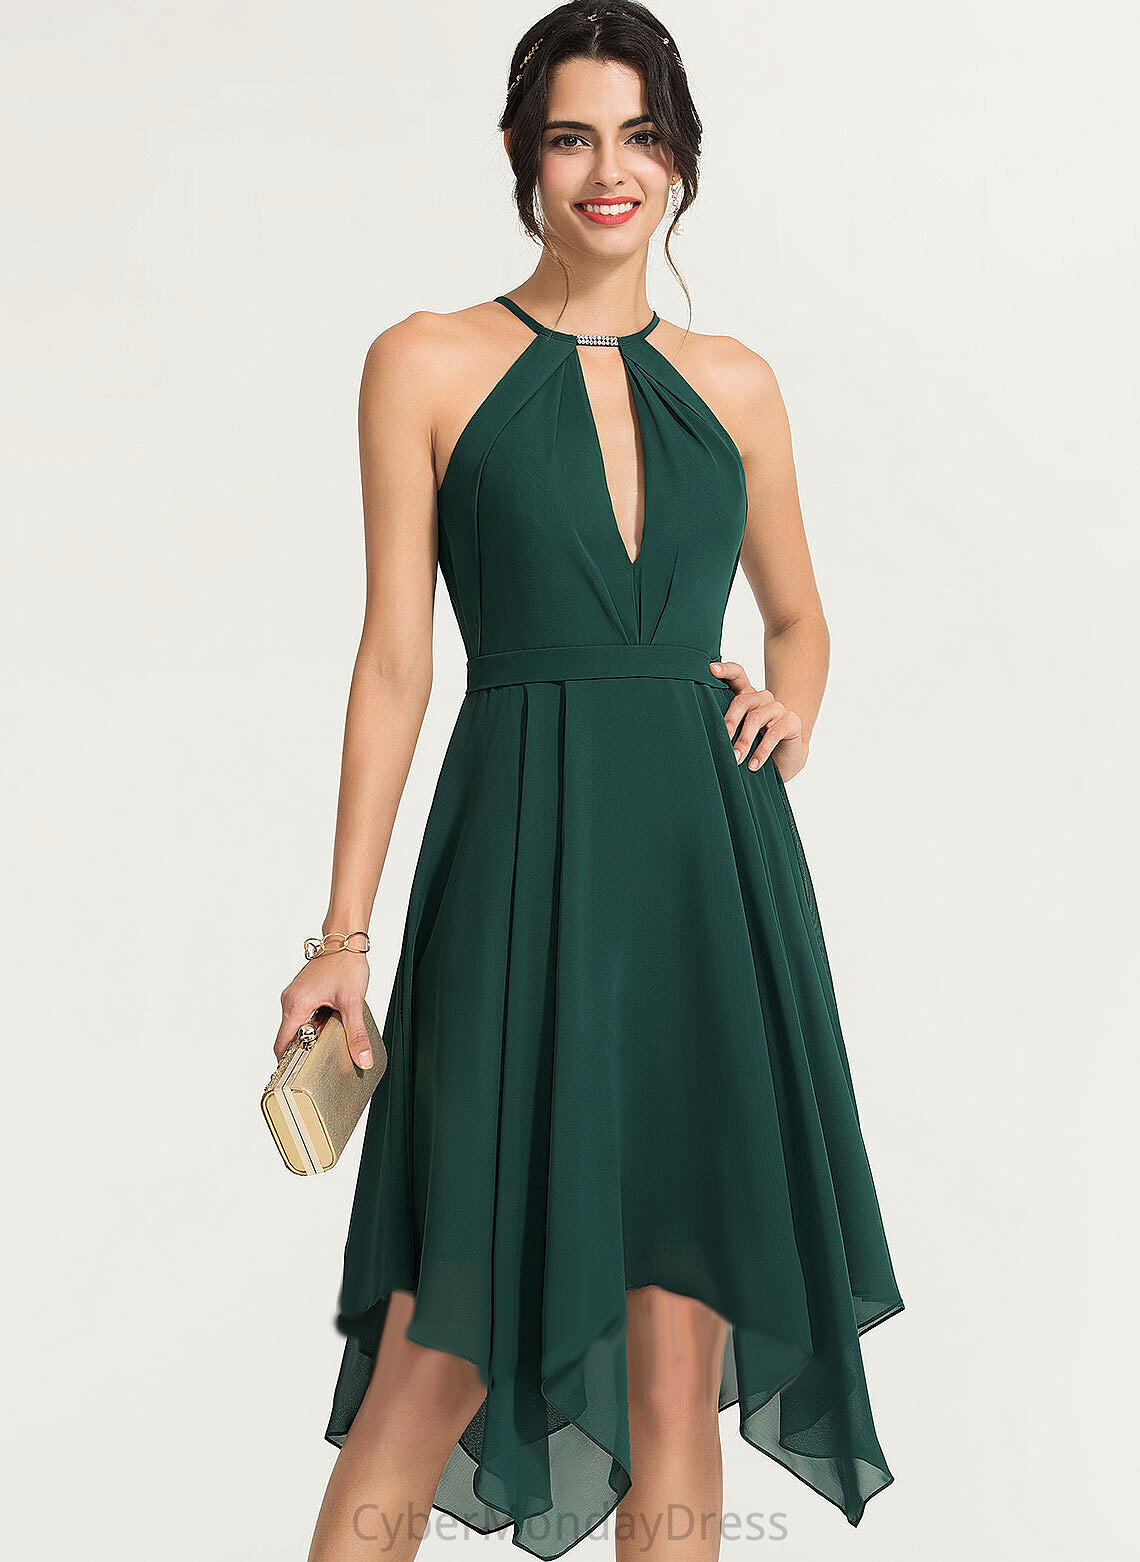 Cocktail A-Line Beading Areli With Neck Cocktail Dresses Chiffon Asymmetrical Scoop Dress